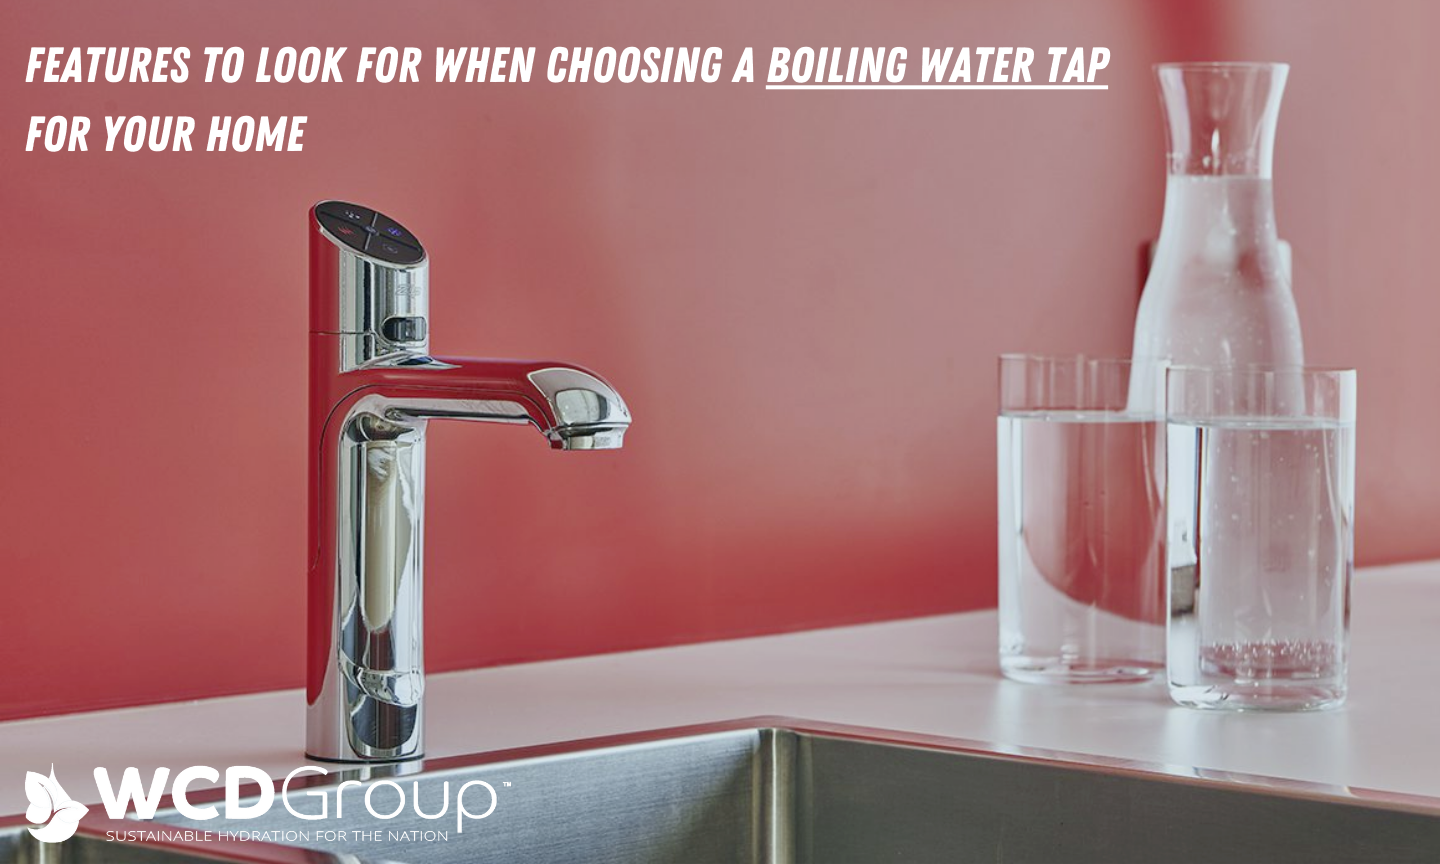 The features to look for when choosing a Boiling Water Tap for your home